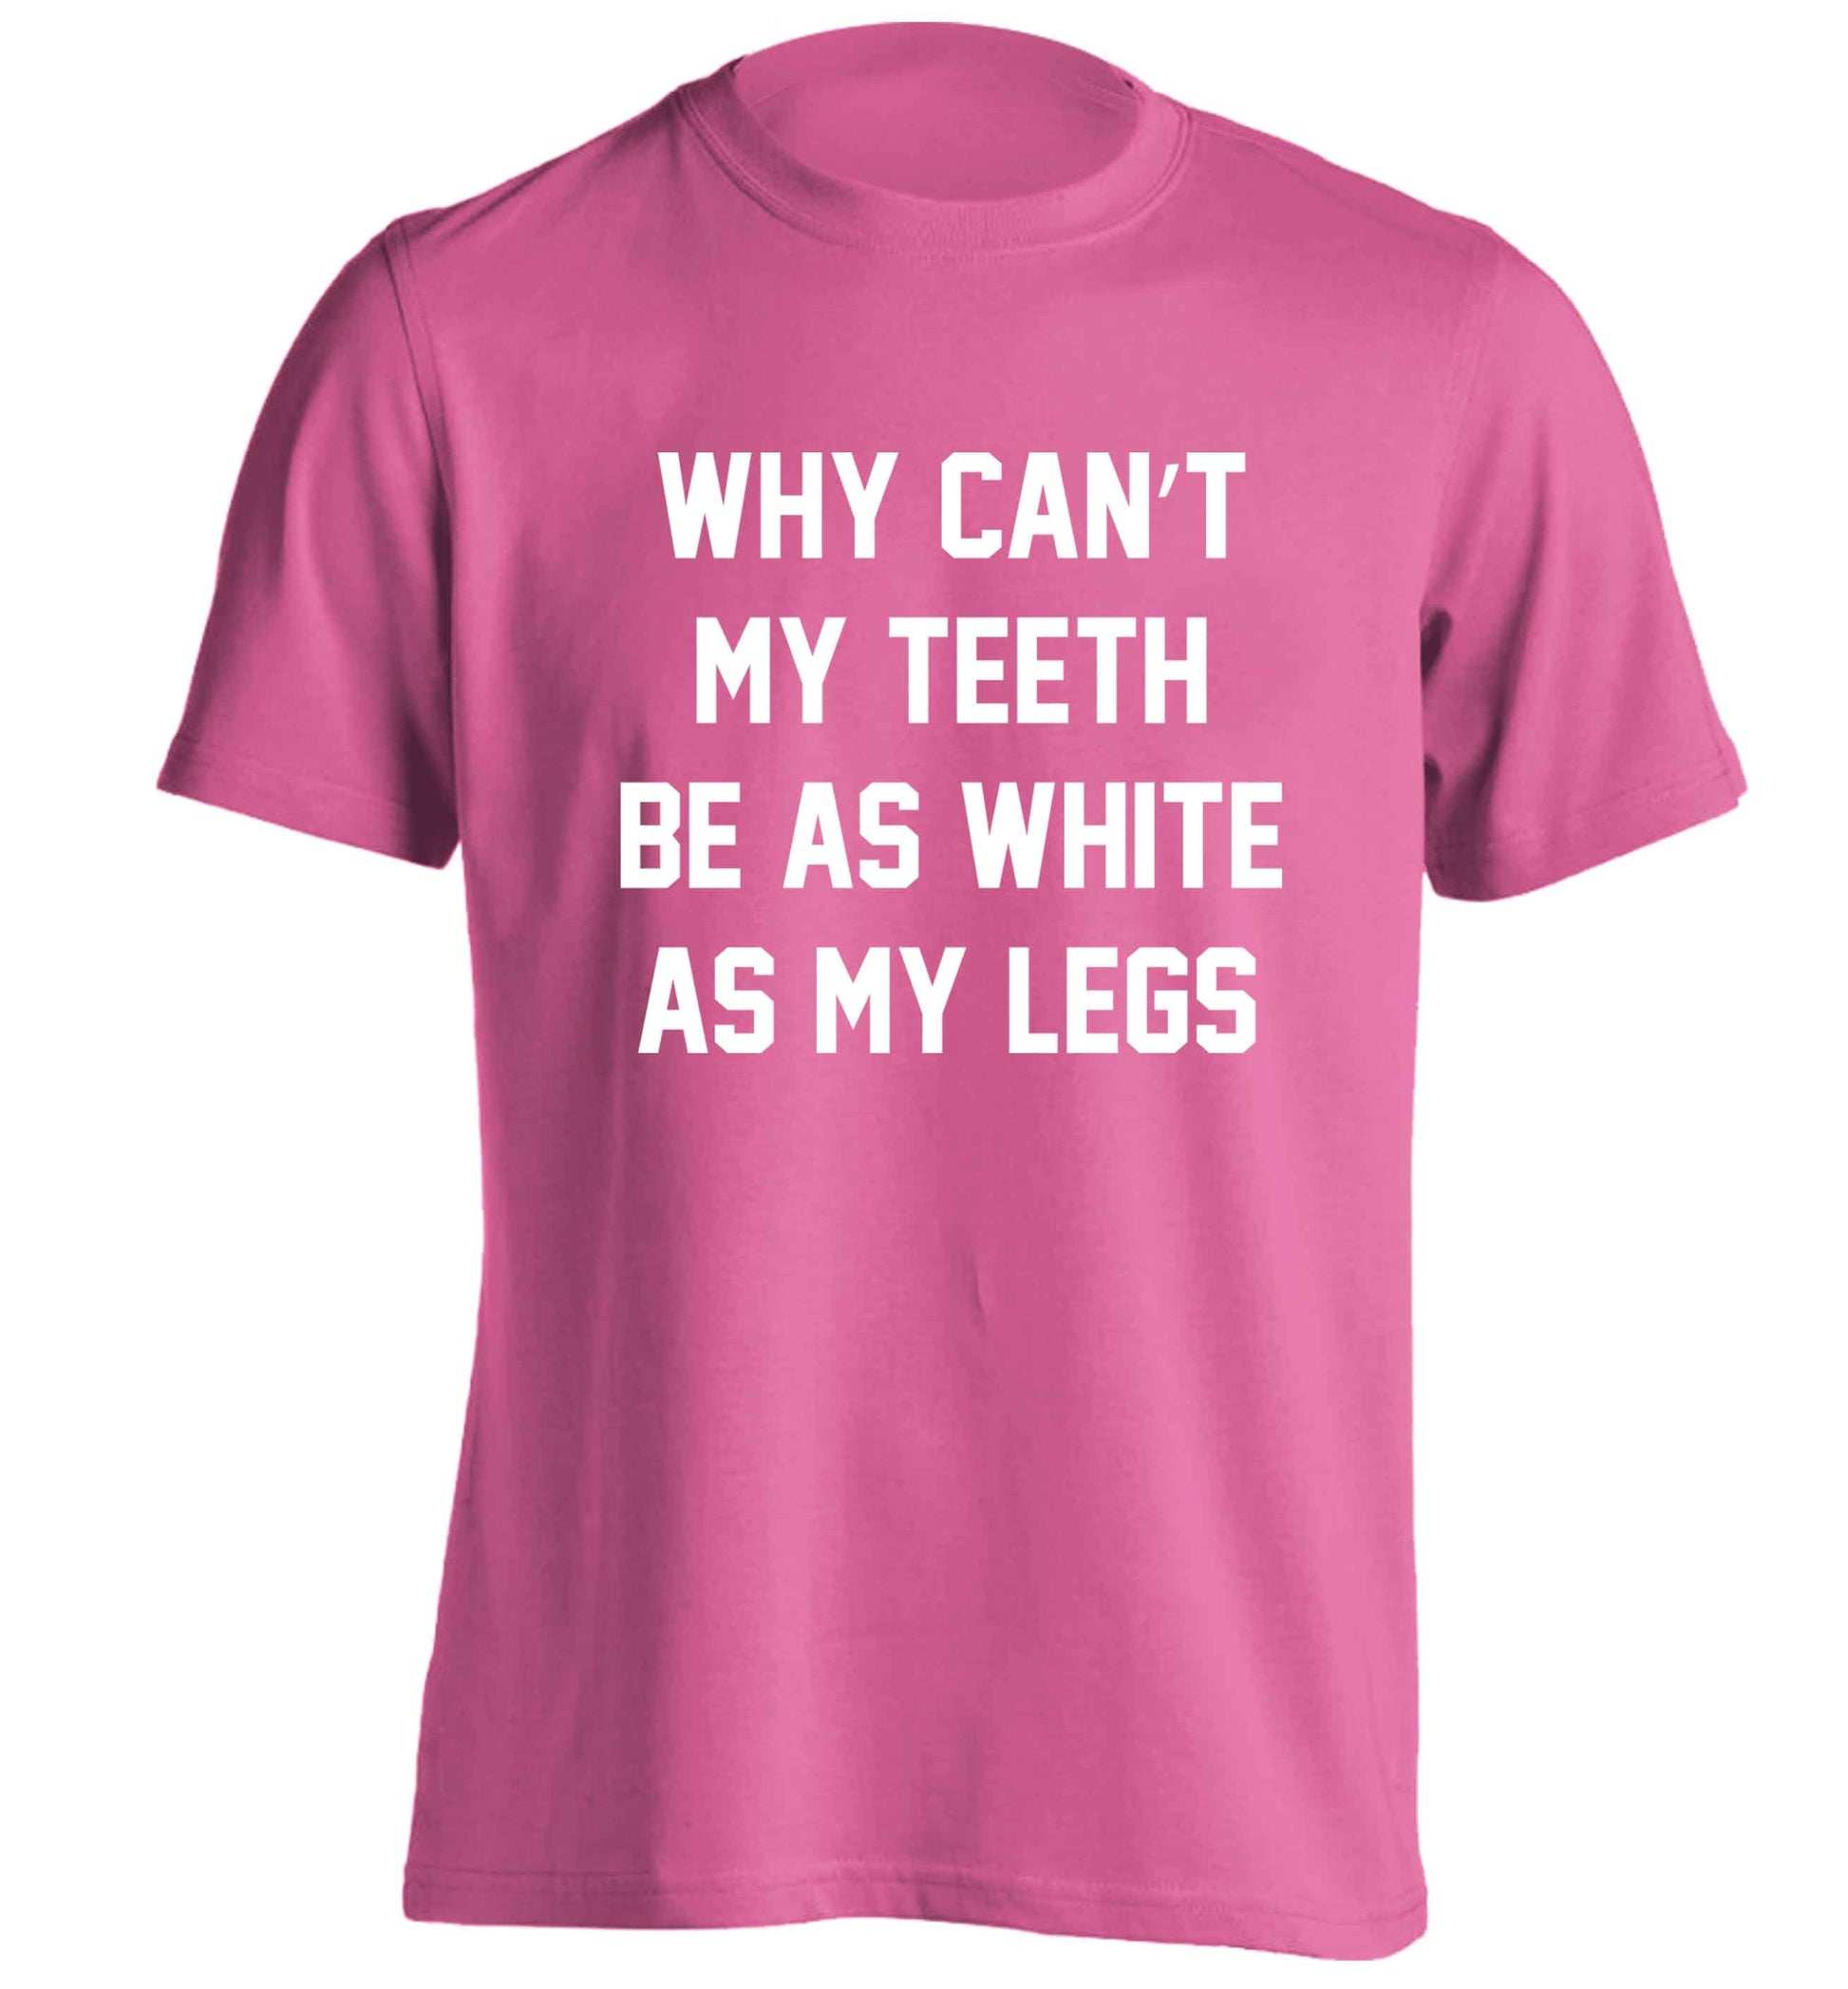 Why can't my teeth be as white as my legs adults unisex pink Tshirt 2XL